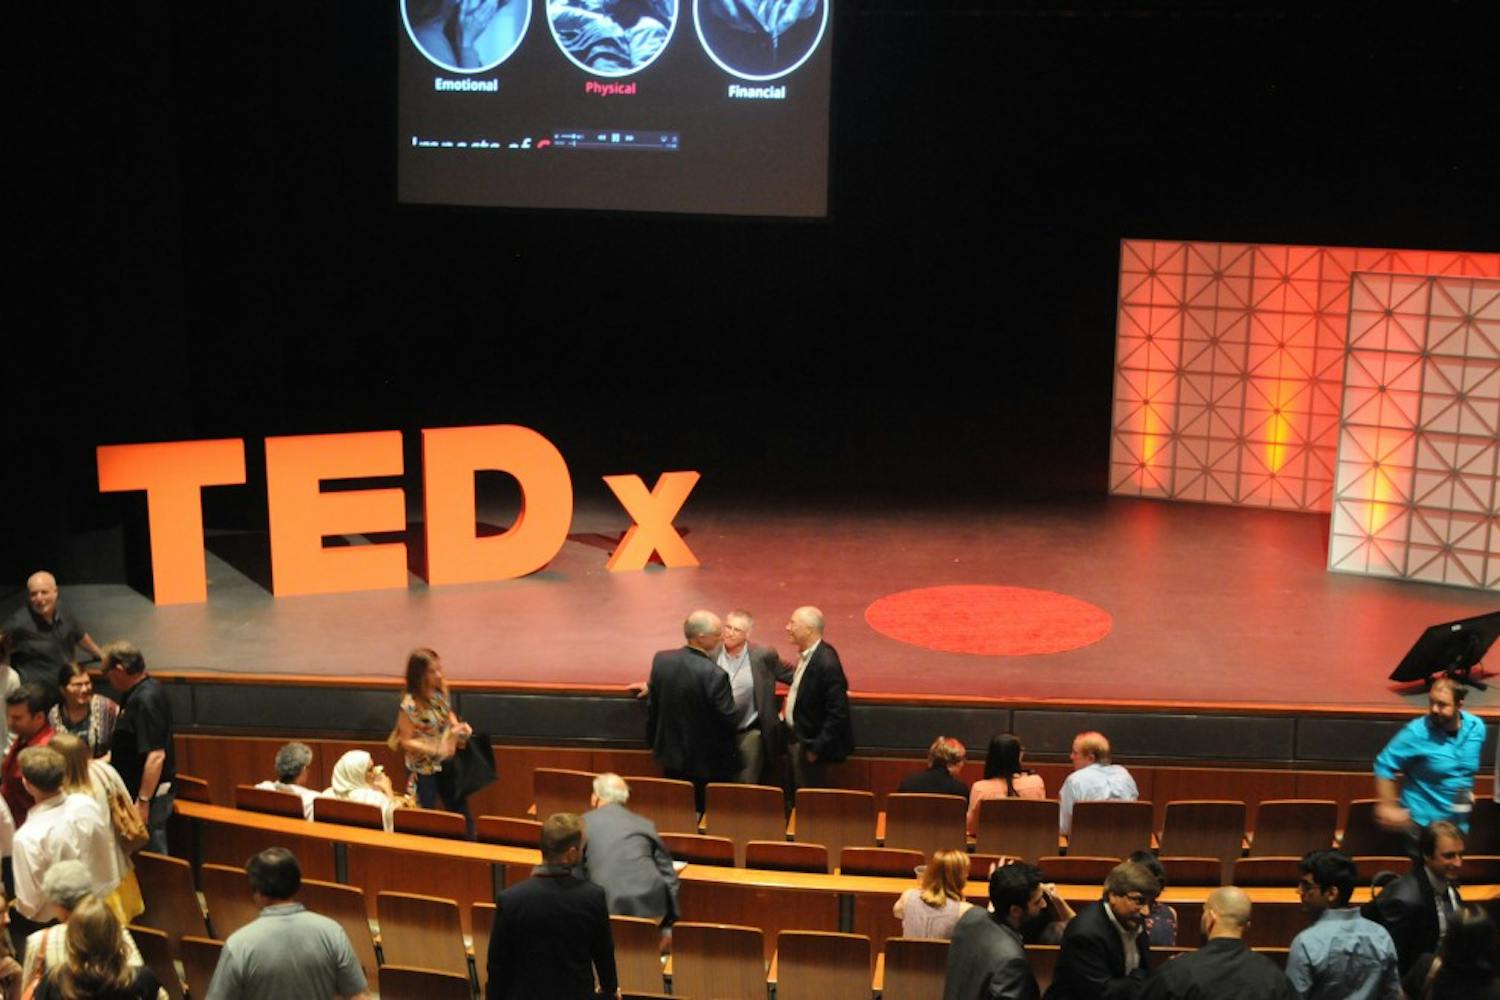 The TEDx ASU conference was held in the Tempe Center for the Arts on Wednesday, March 22, 2017.